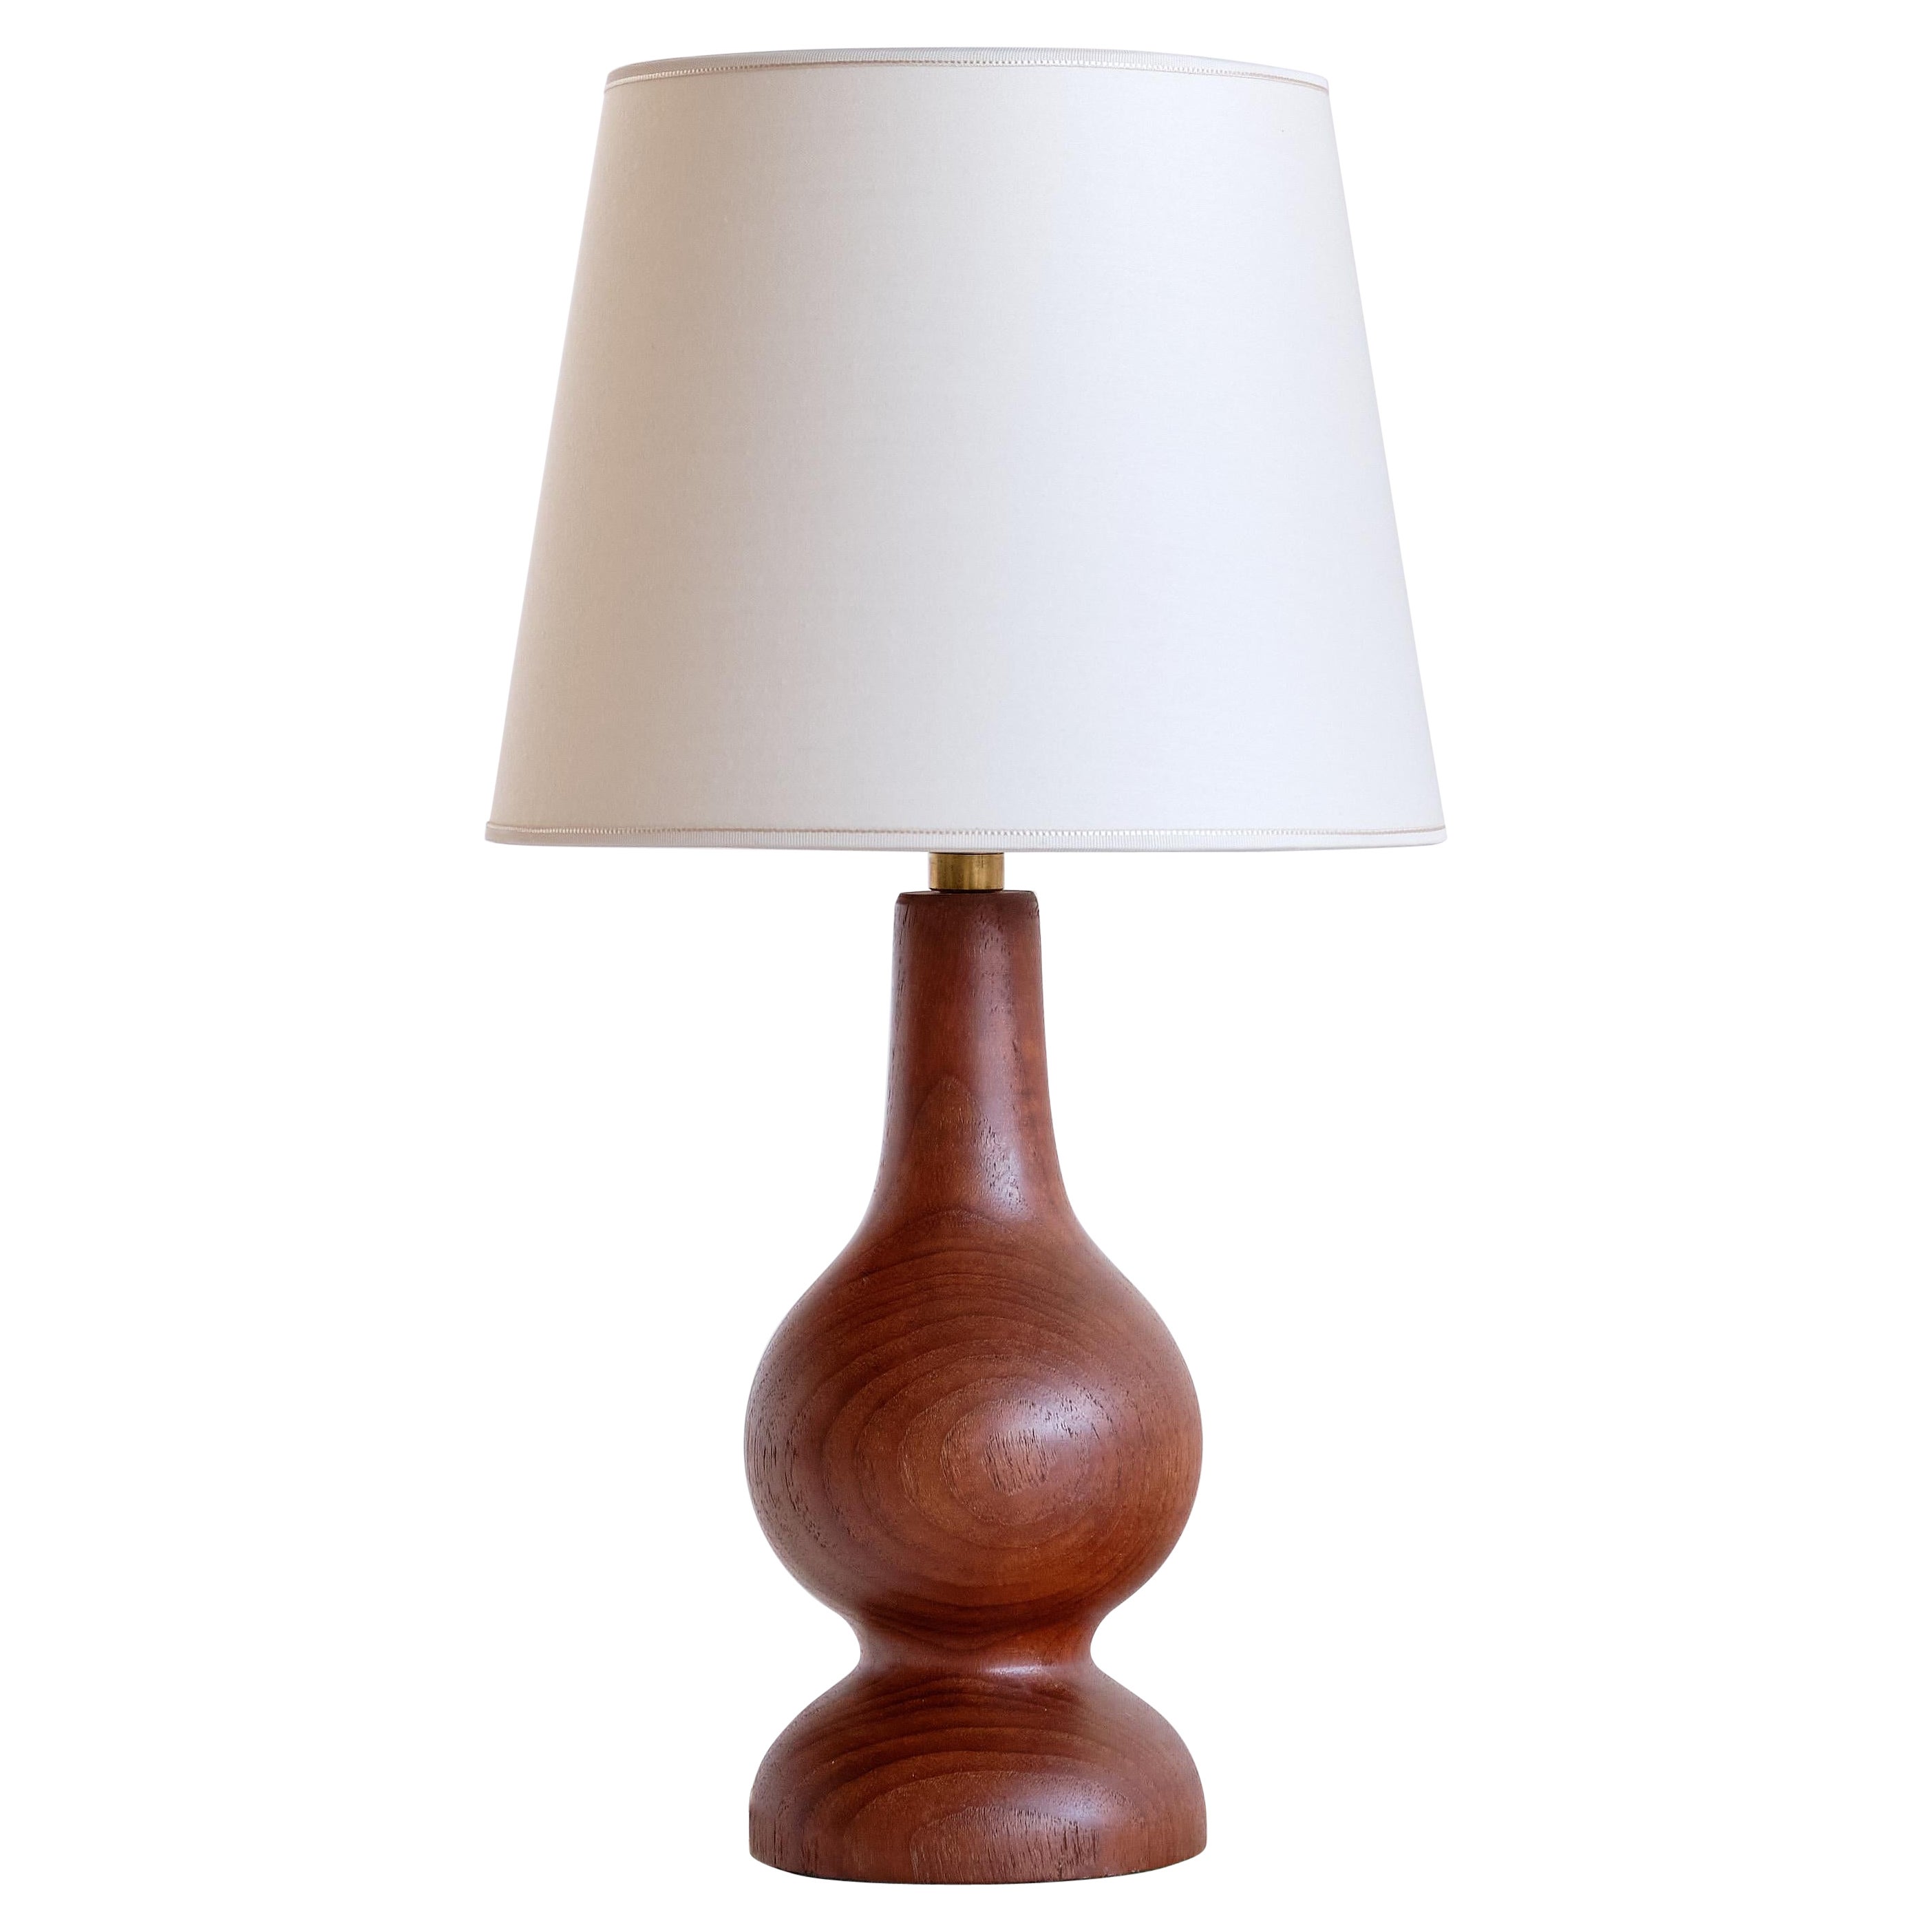 Sculptural Table Lamp in Teak Wood and Ivory Drum Shade, Denmark, 1960s For Sale